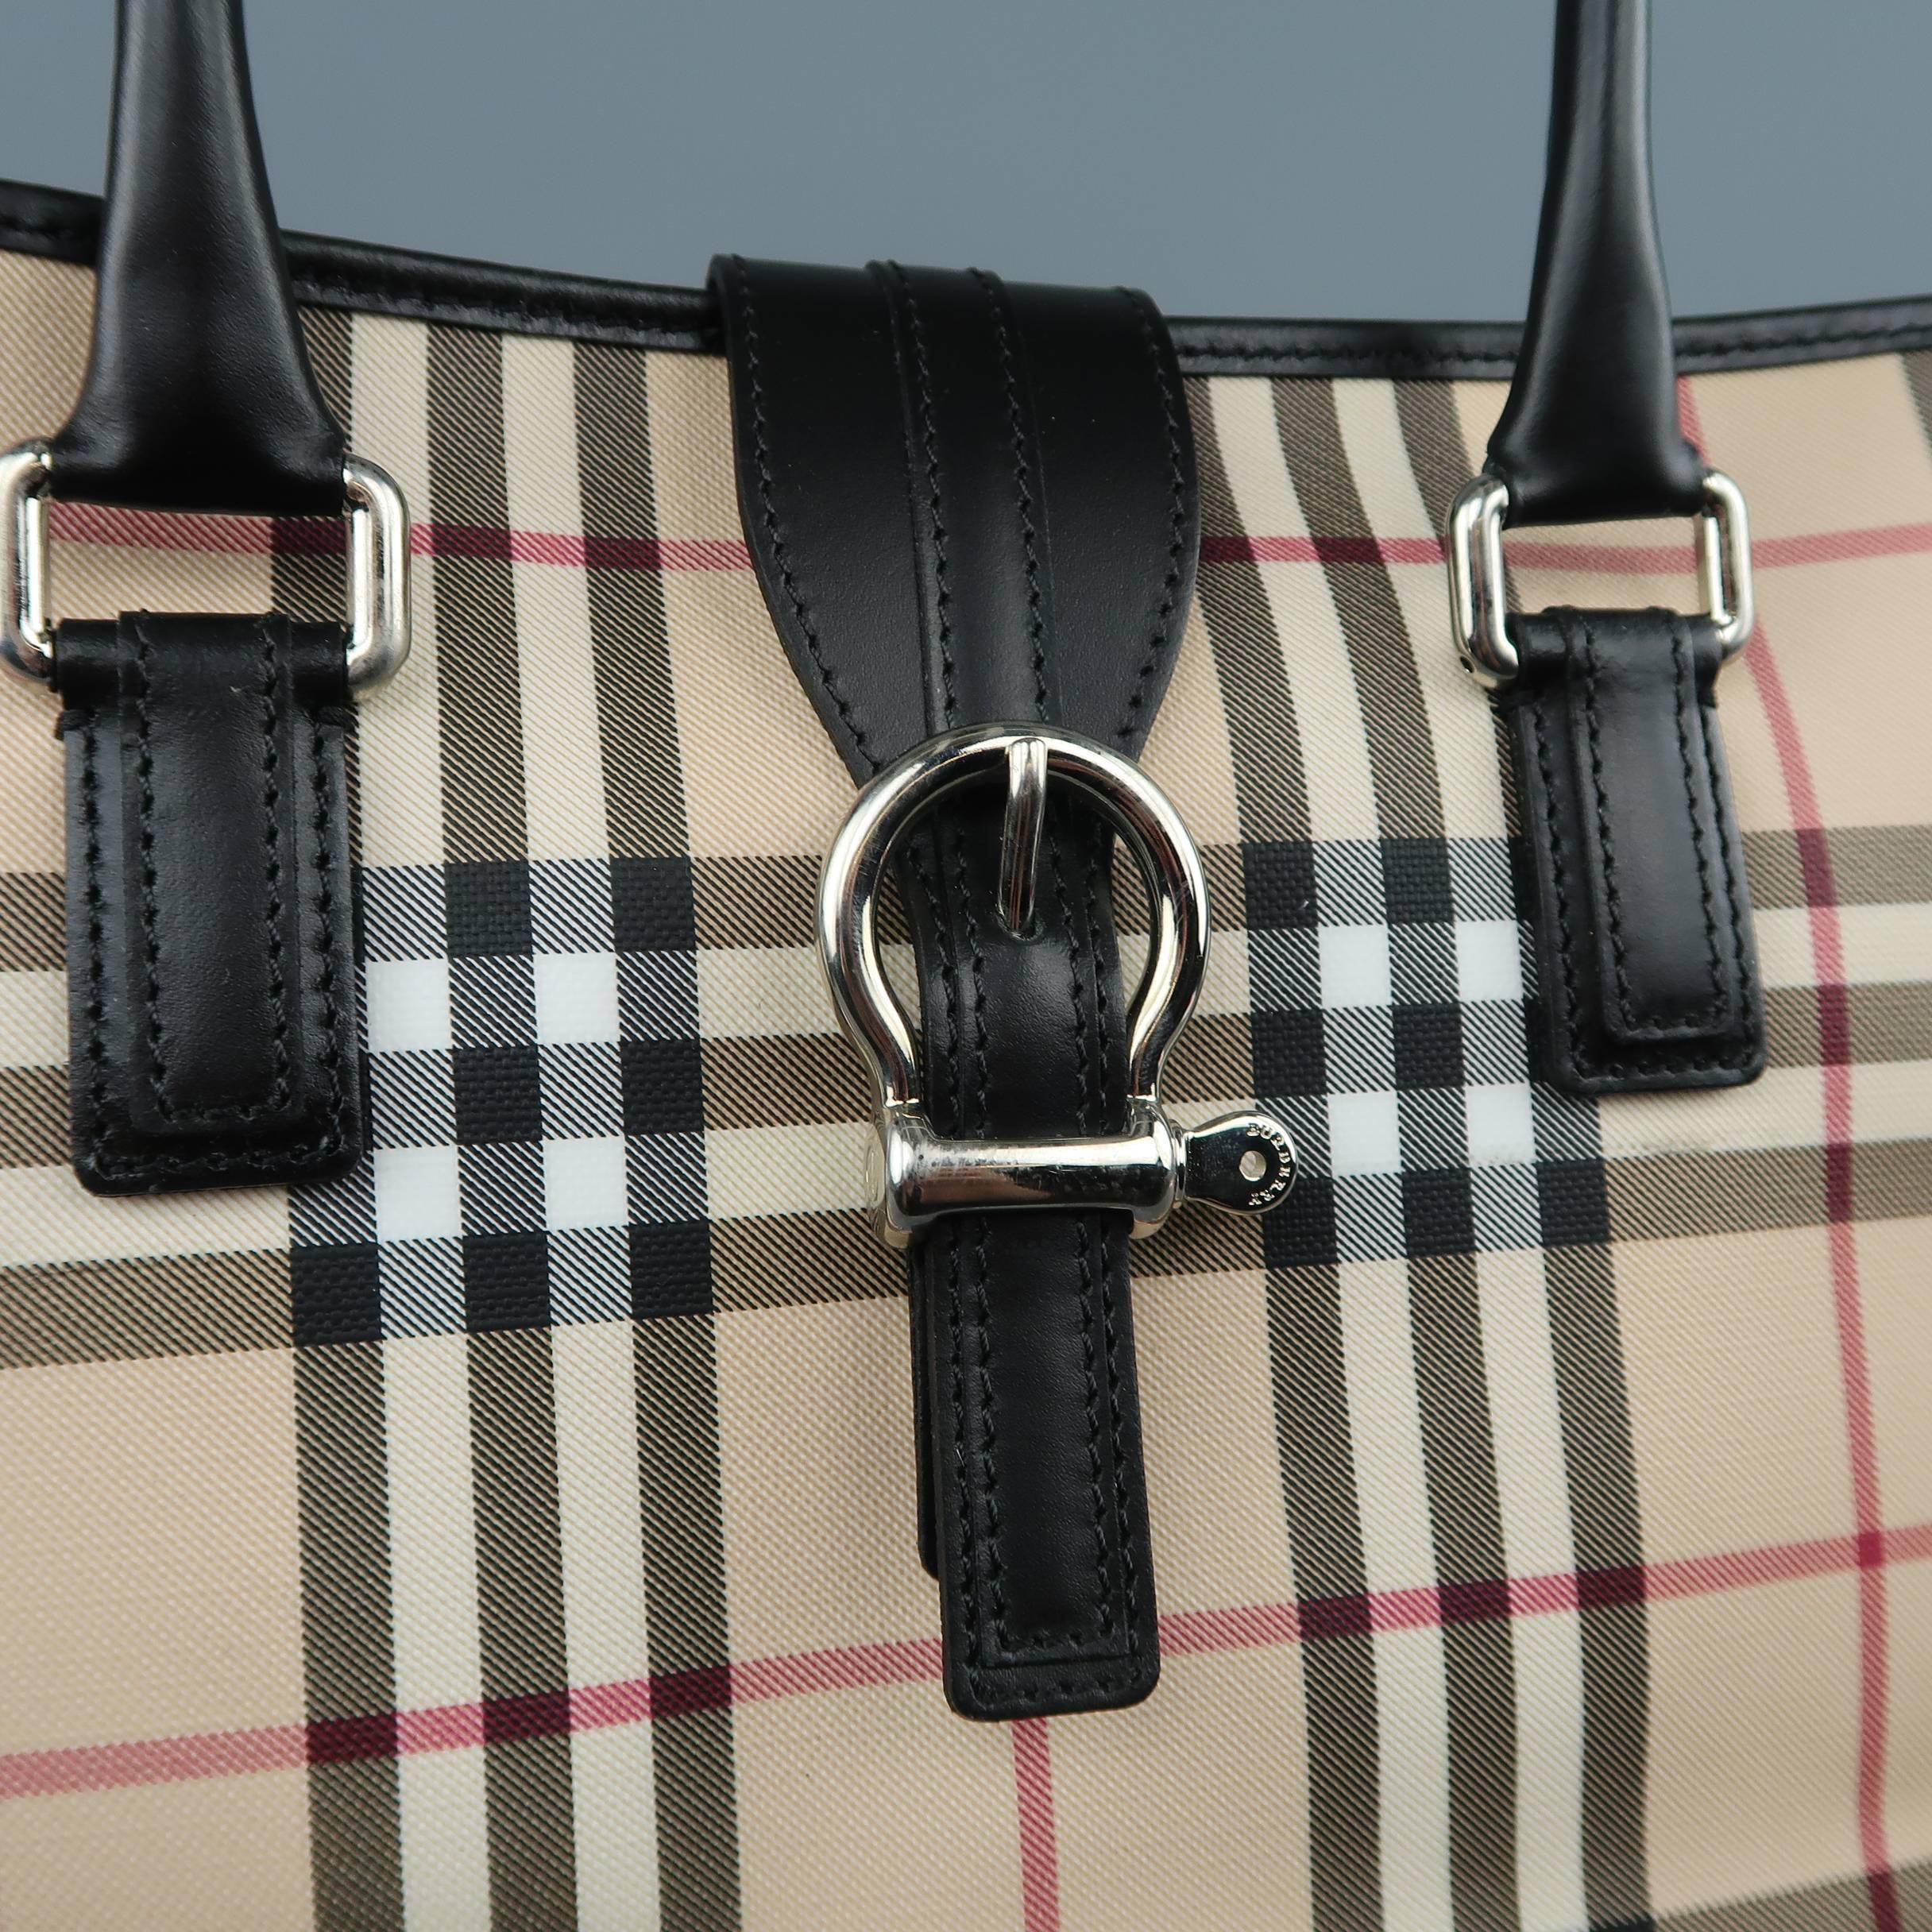 BURBERRY shoulder tote bag comes in beige signature plaid print rubberized canvas with black leather covered double top handles, snap belt buckle top closure, and expandable sides with snaps. Made in Italy.
 
New with Tags.
 
Measurements:
 
Length: